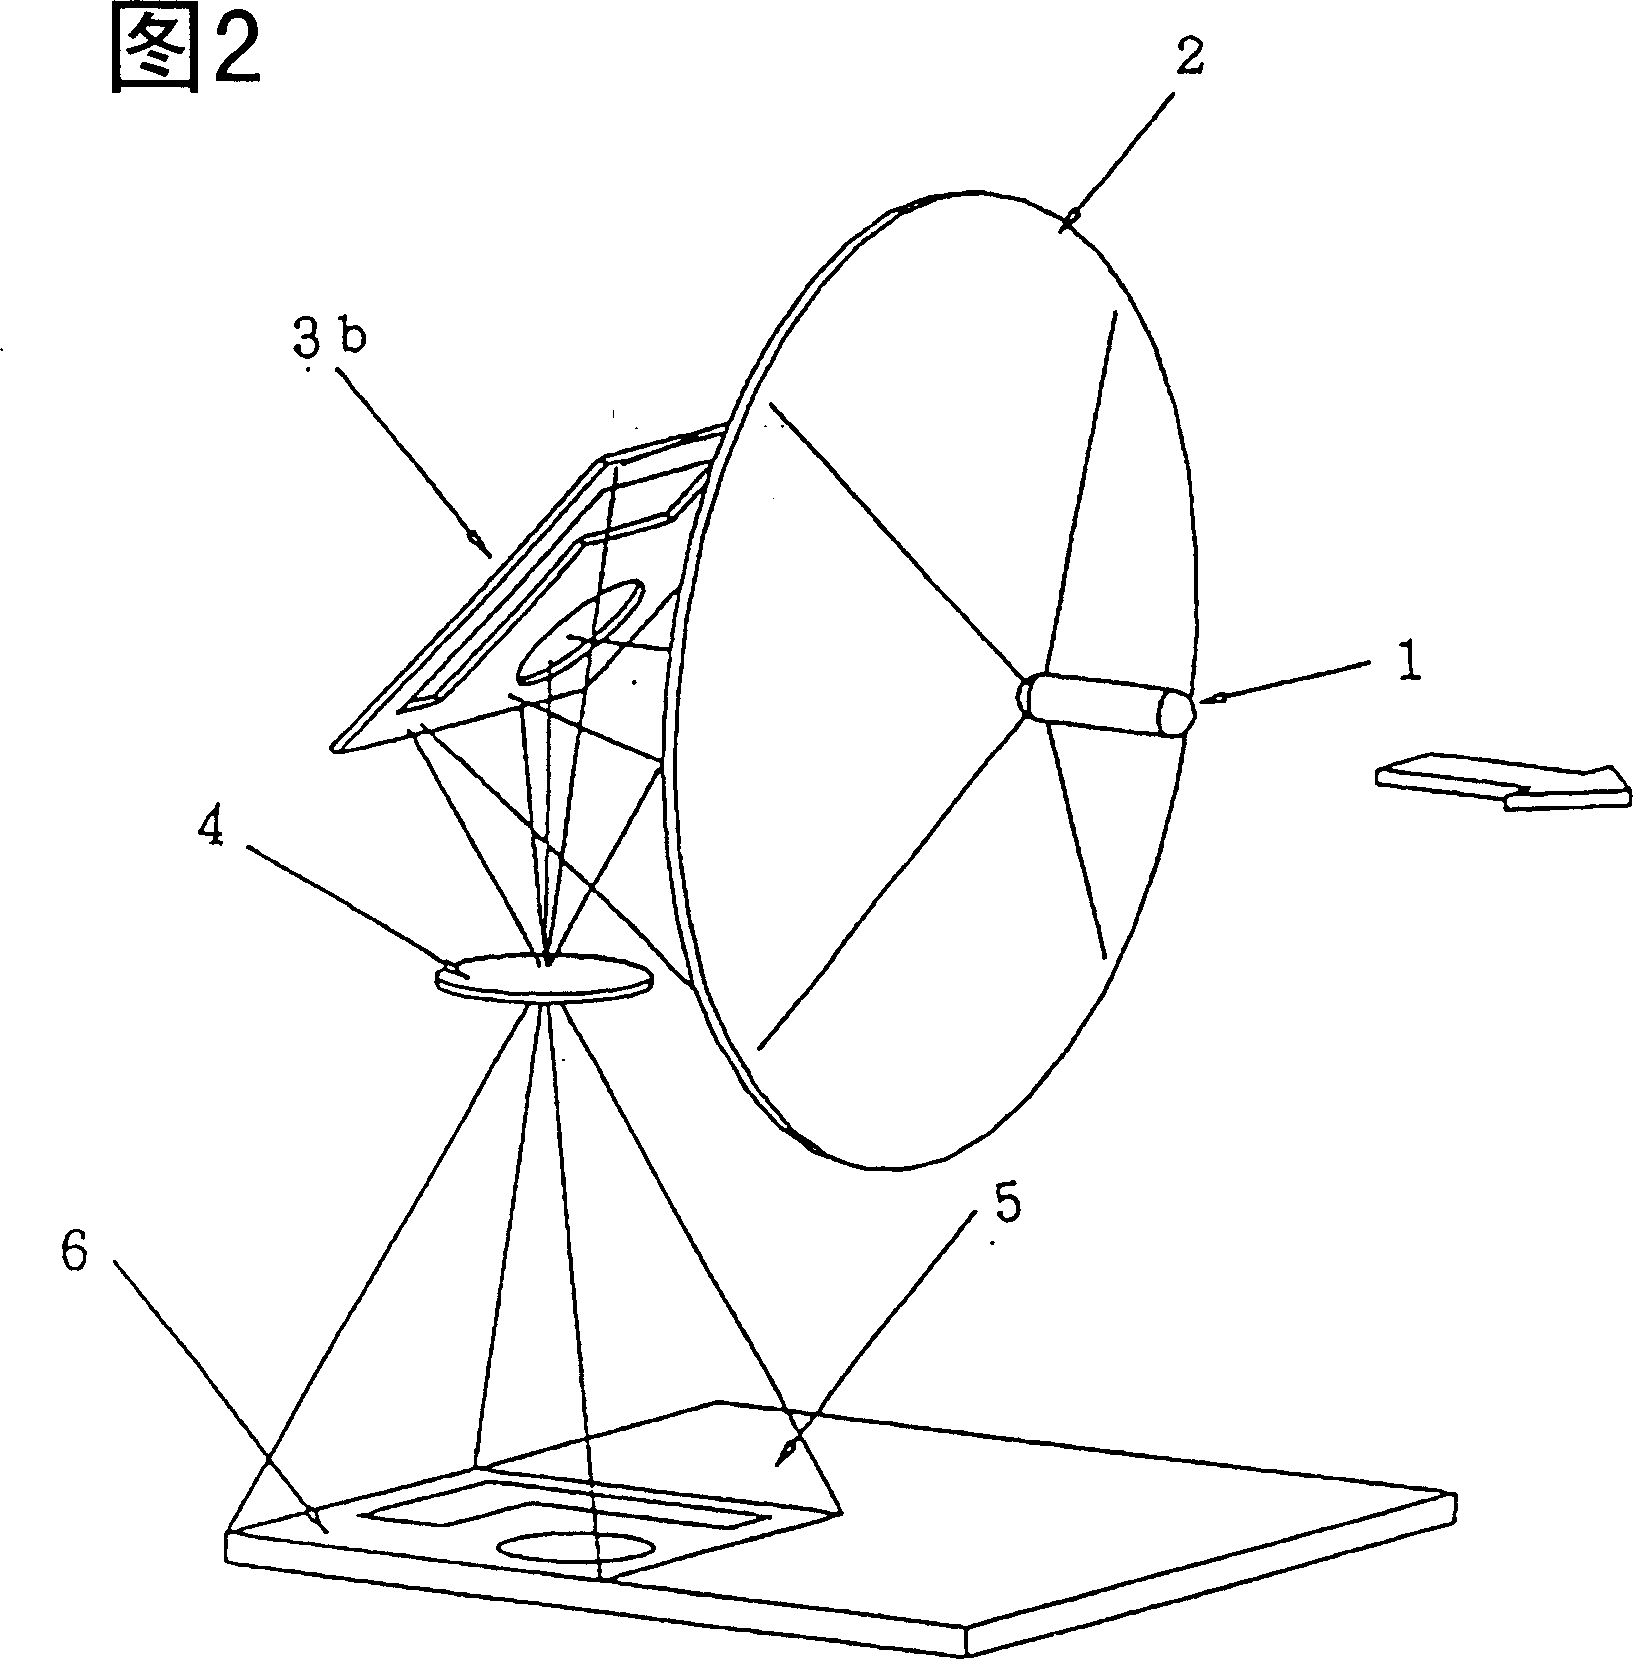 Optical three-dimensional moulding method and device